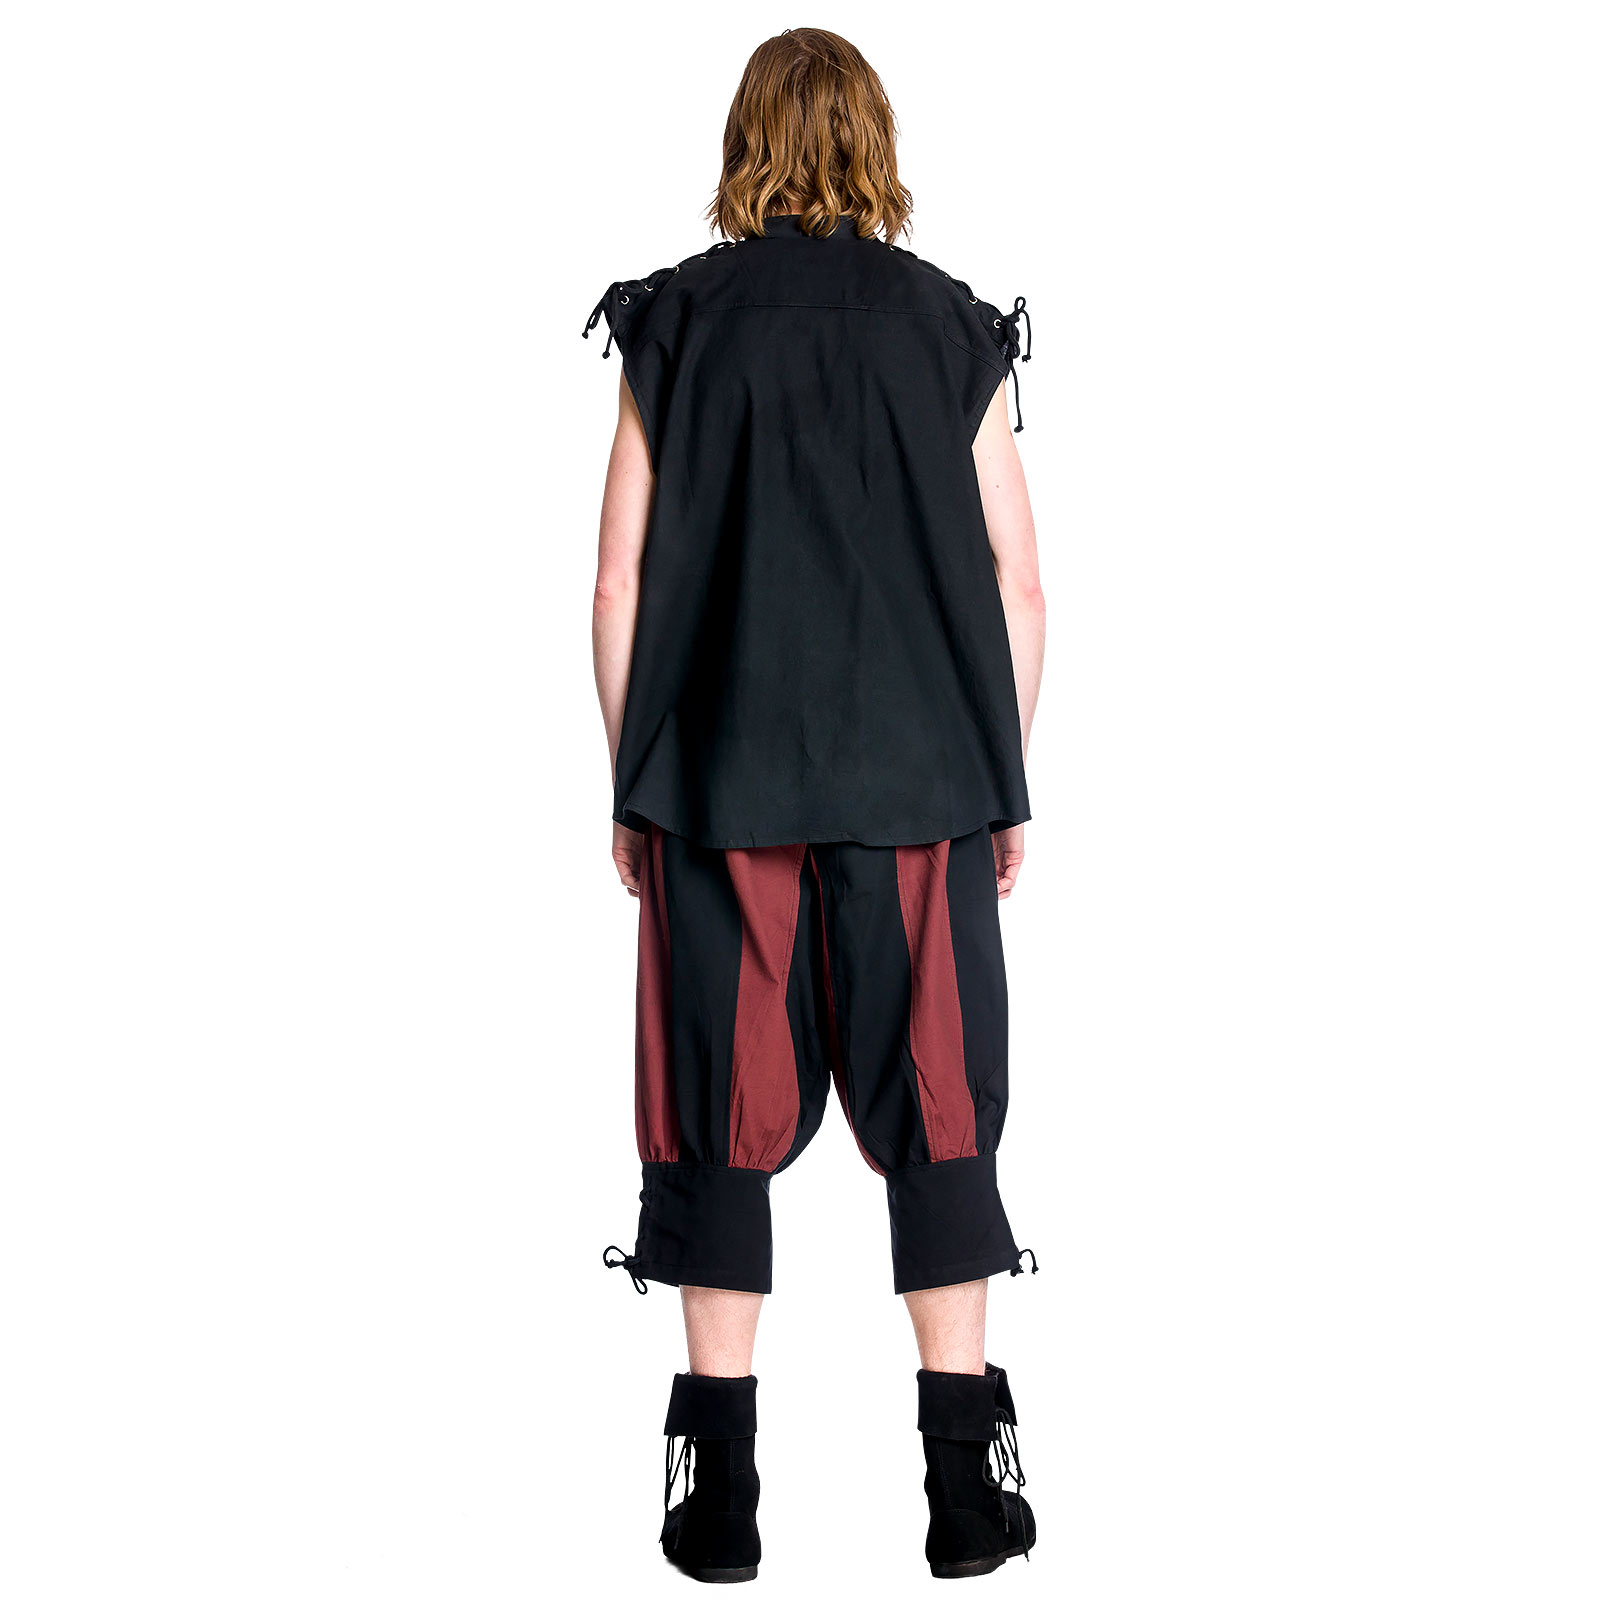 Medieval knee breeches black-red